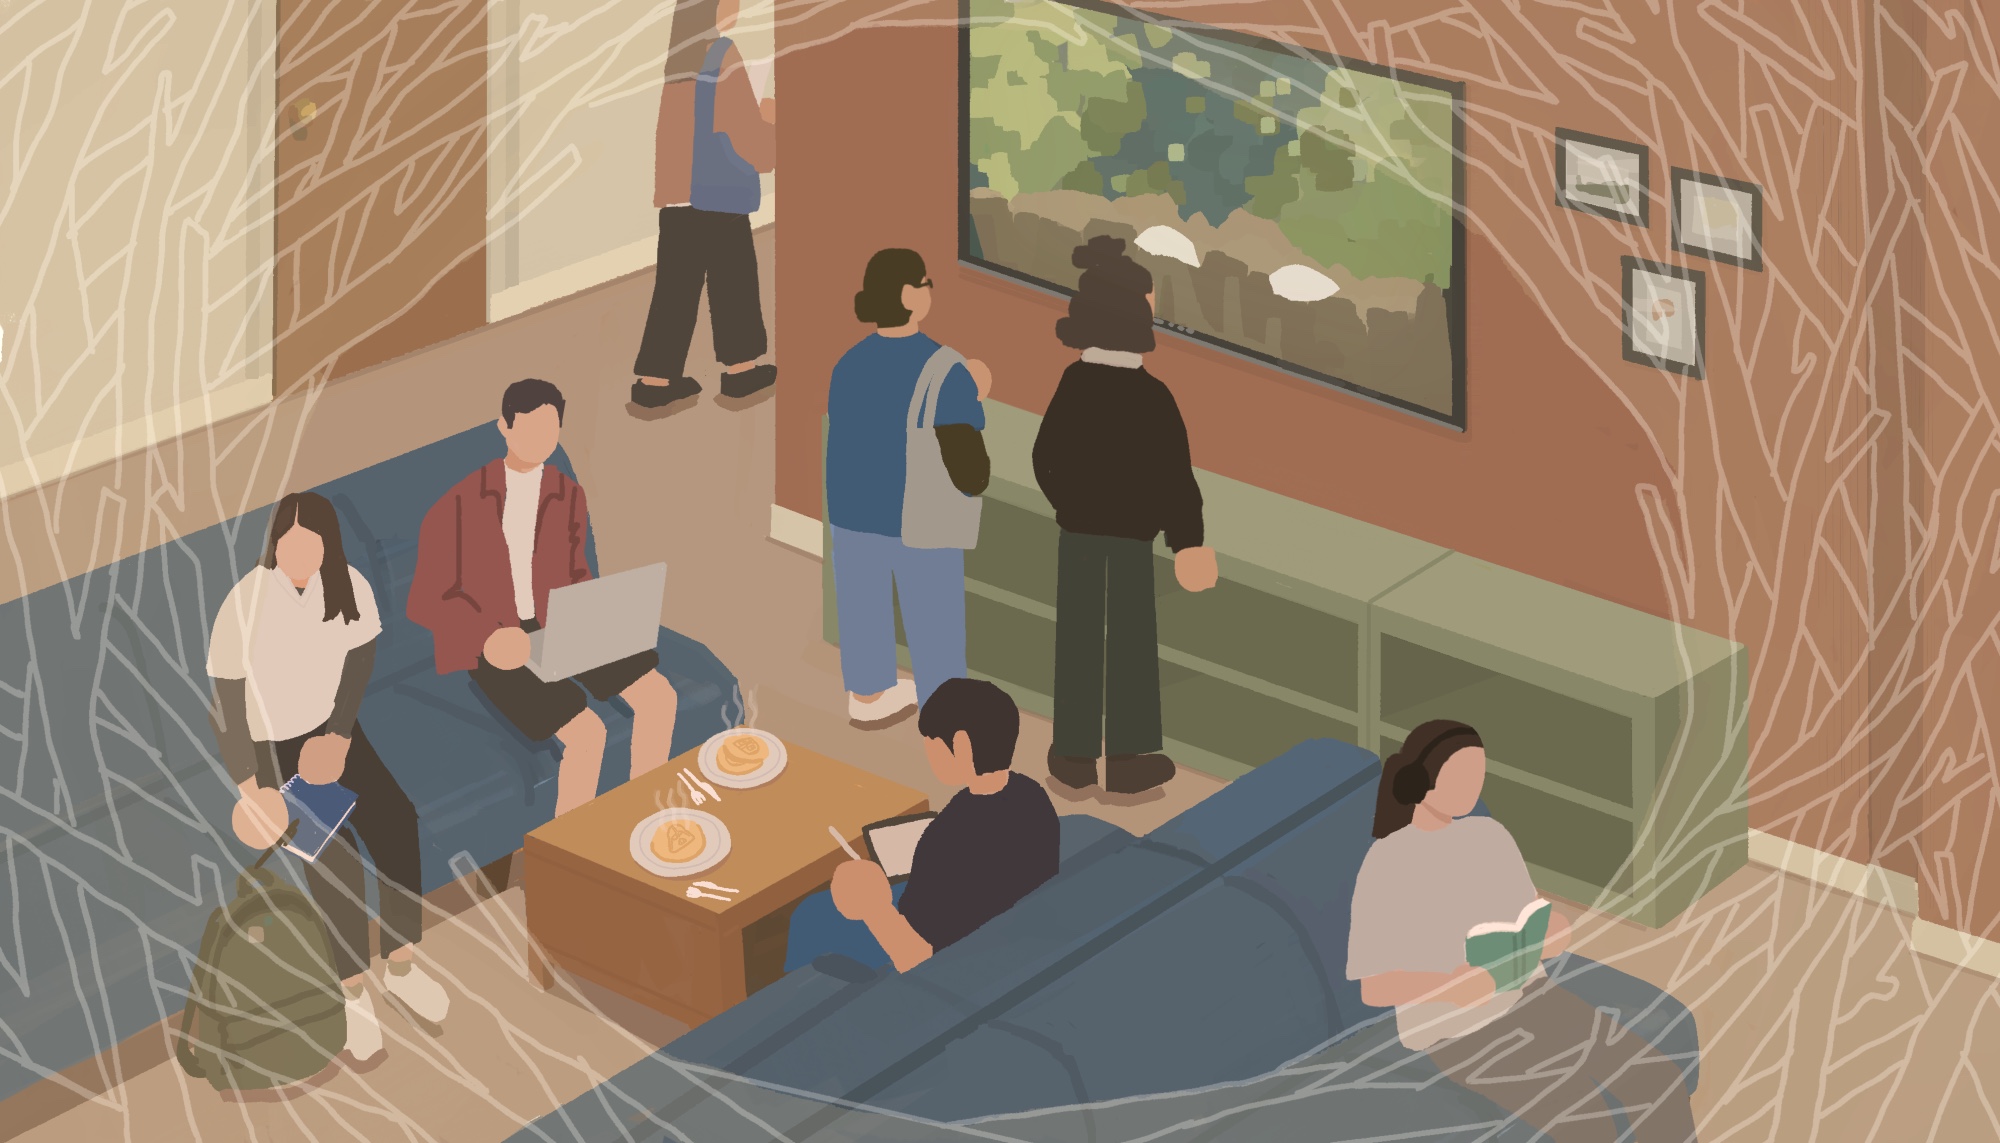 An illustration of people sitting in a public room with couches and tables. There is some hot food in some of the tables. Some people are standing watching TV.